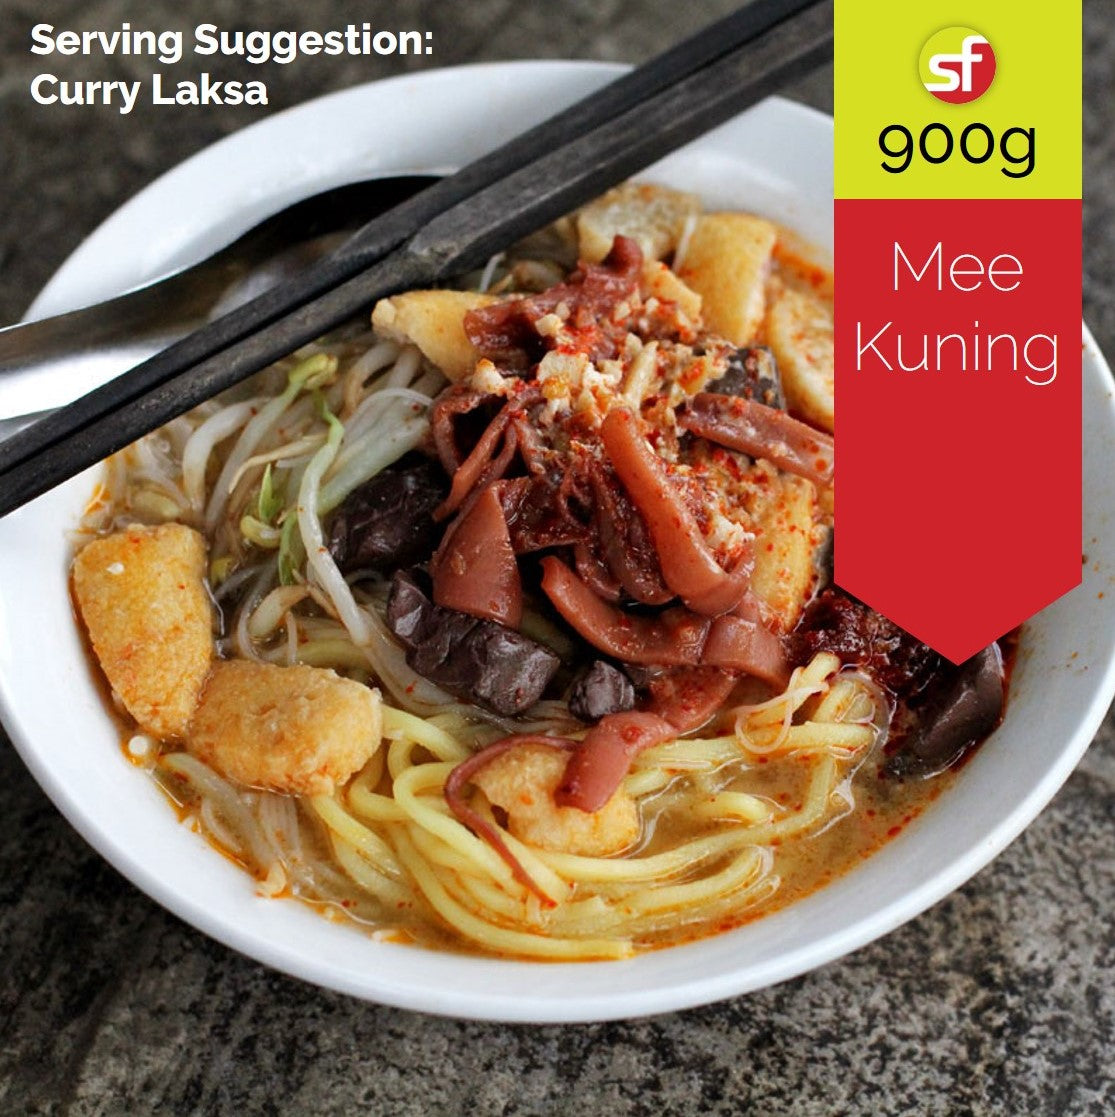 Mee Kuning Kecil (Yellow Noodles, 水面, 黄面)